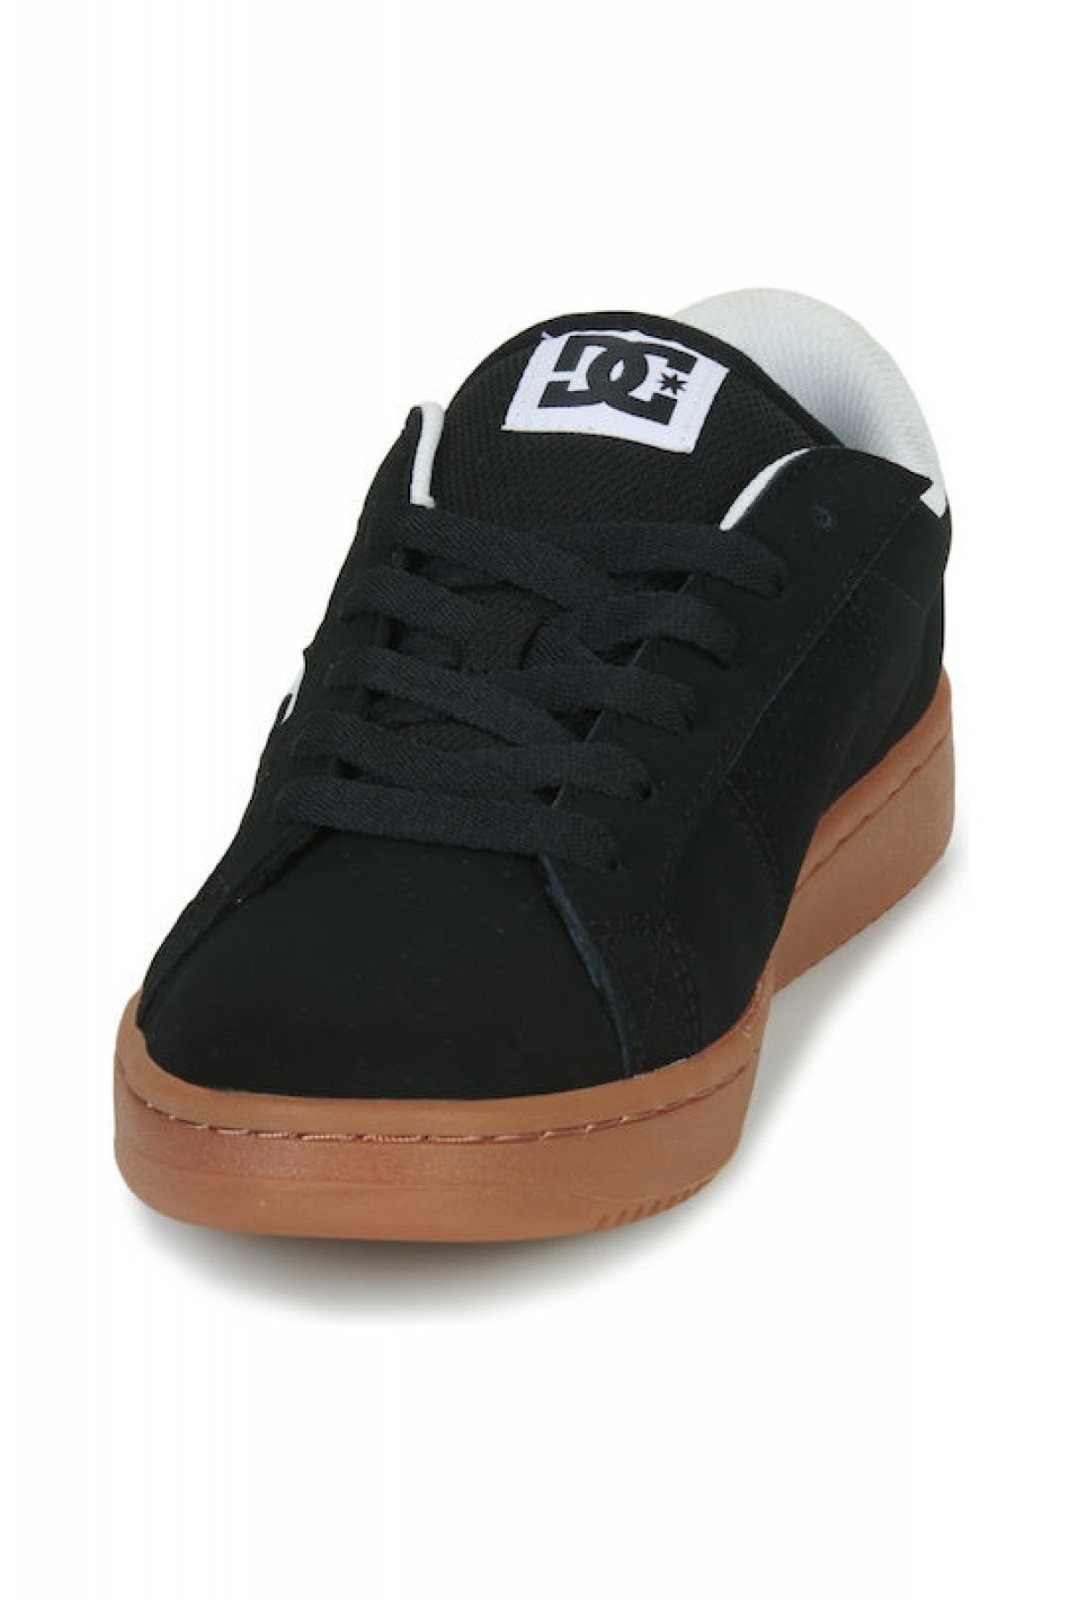 Sneakers cuir Striker Dc shoes BW6 ADYS100624